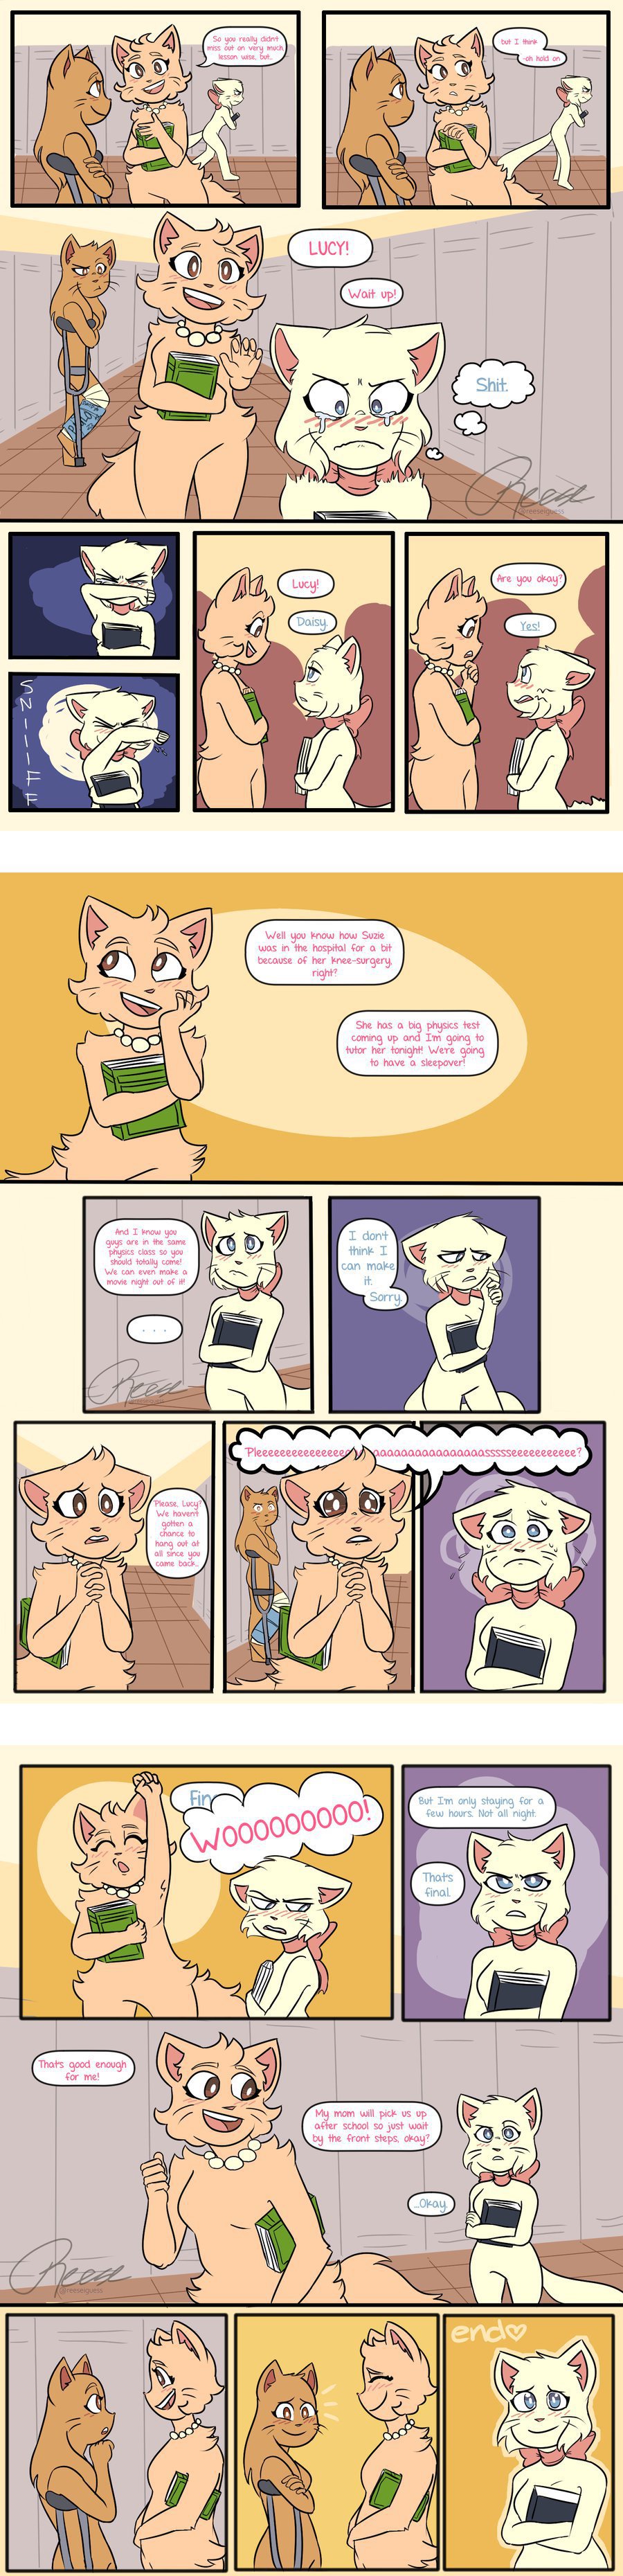 Candybooru image #15025, tagged with Daisy Lucy Sue comic fob_(Artist)